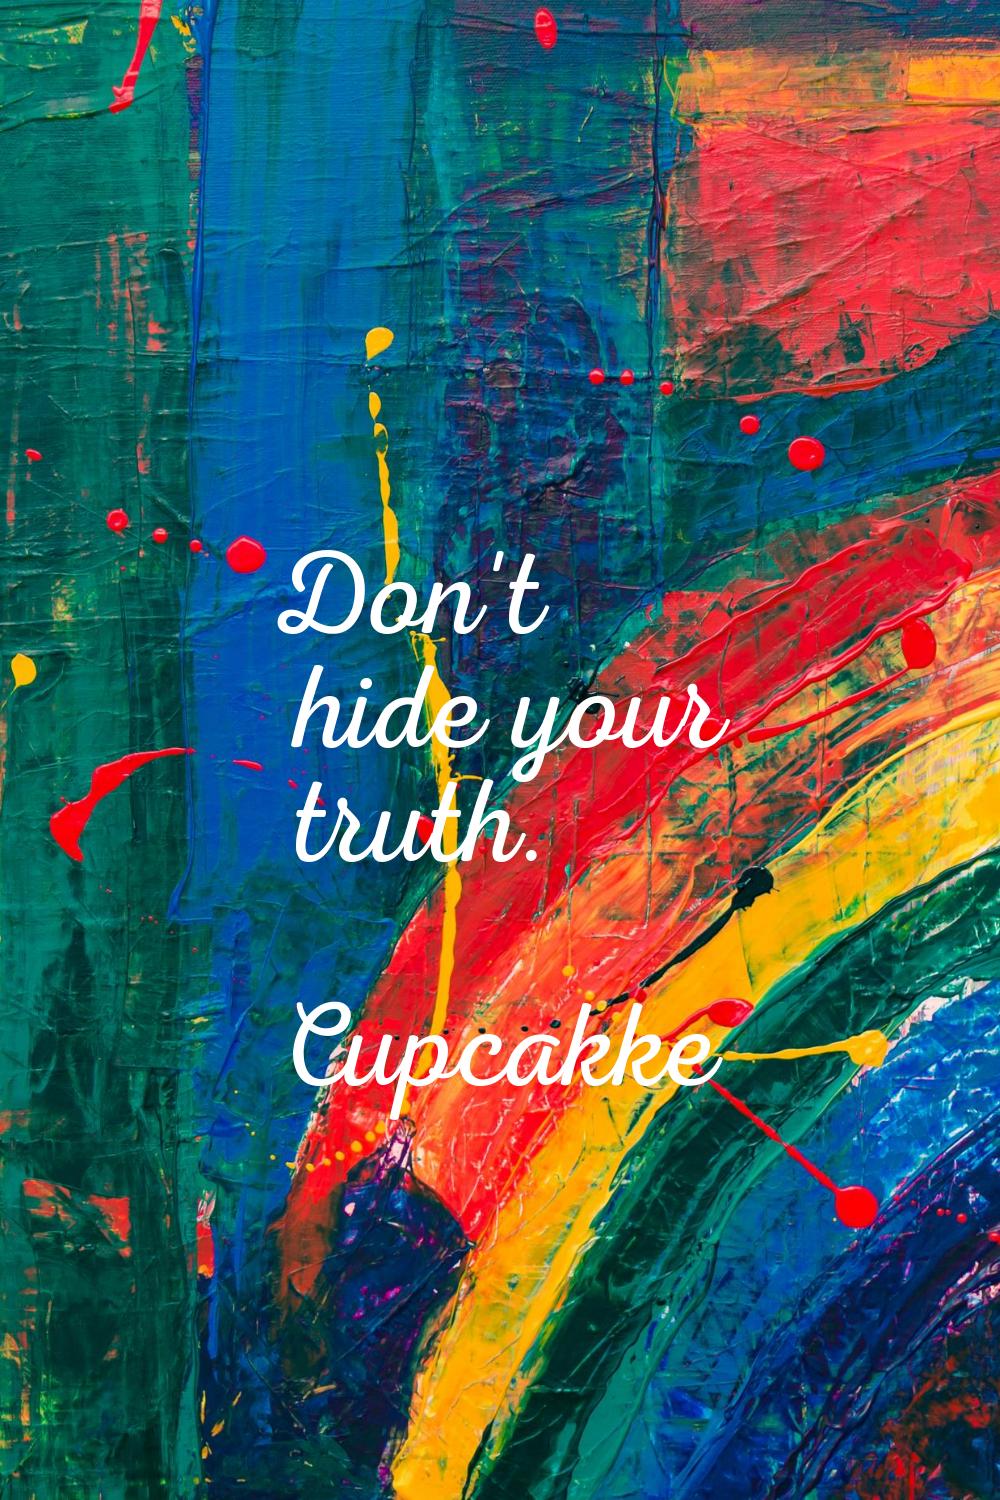 Don't hide your truth.